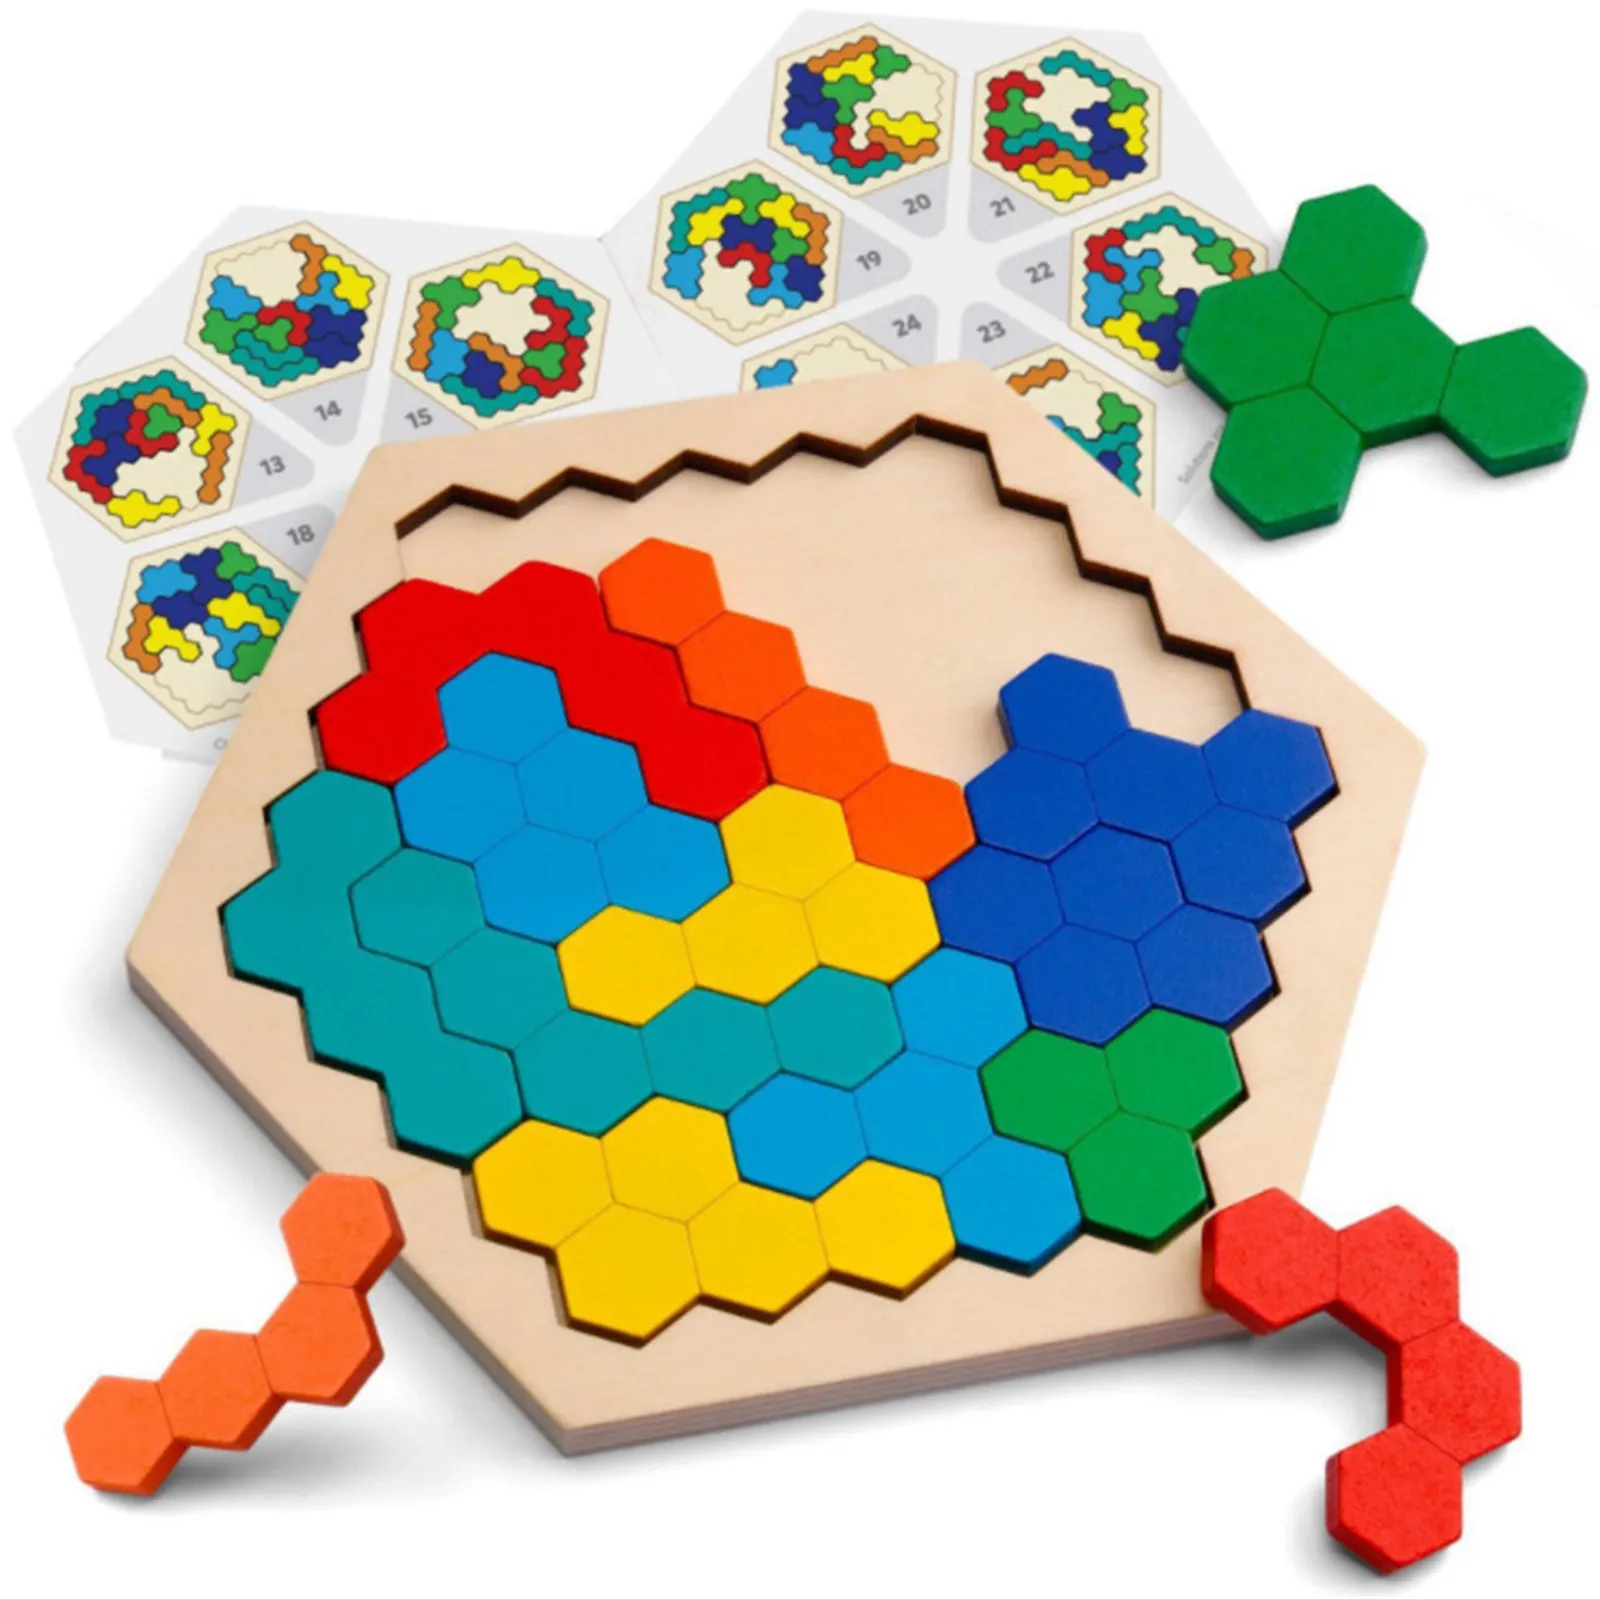 

Coogam Wooden Hexagon Puzzle for Kids Adult - Honeycomb Shape Tangram Puzzle Toys Geometry Logic IQ Game STEM Gift for Toddlers